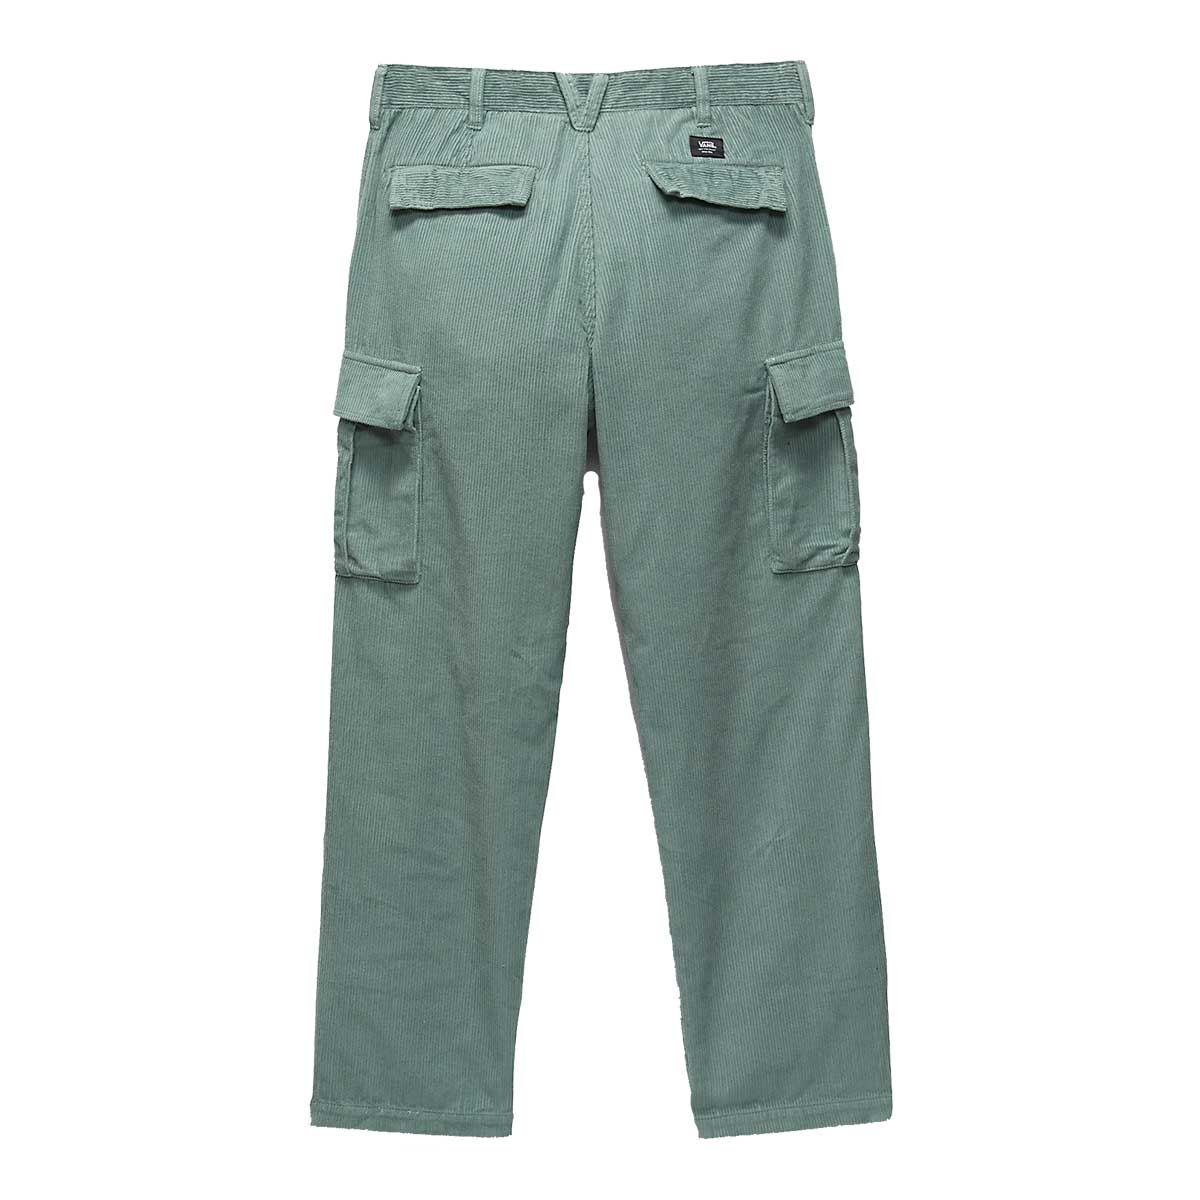 Cargo Pants for Men, Slim-fit Drawsting Performance Long Trousers Outdoor  Casual Stretch Tapered Pants Men - Walmart.com